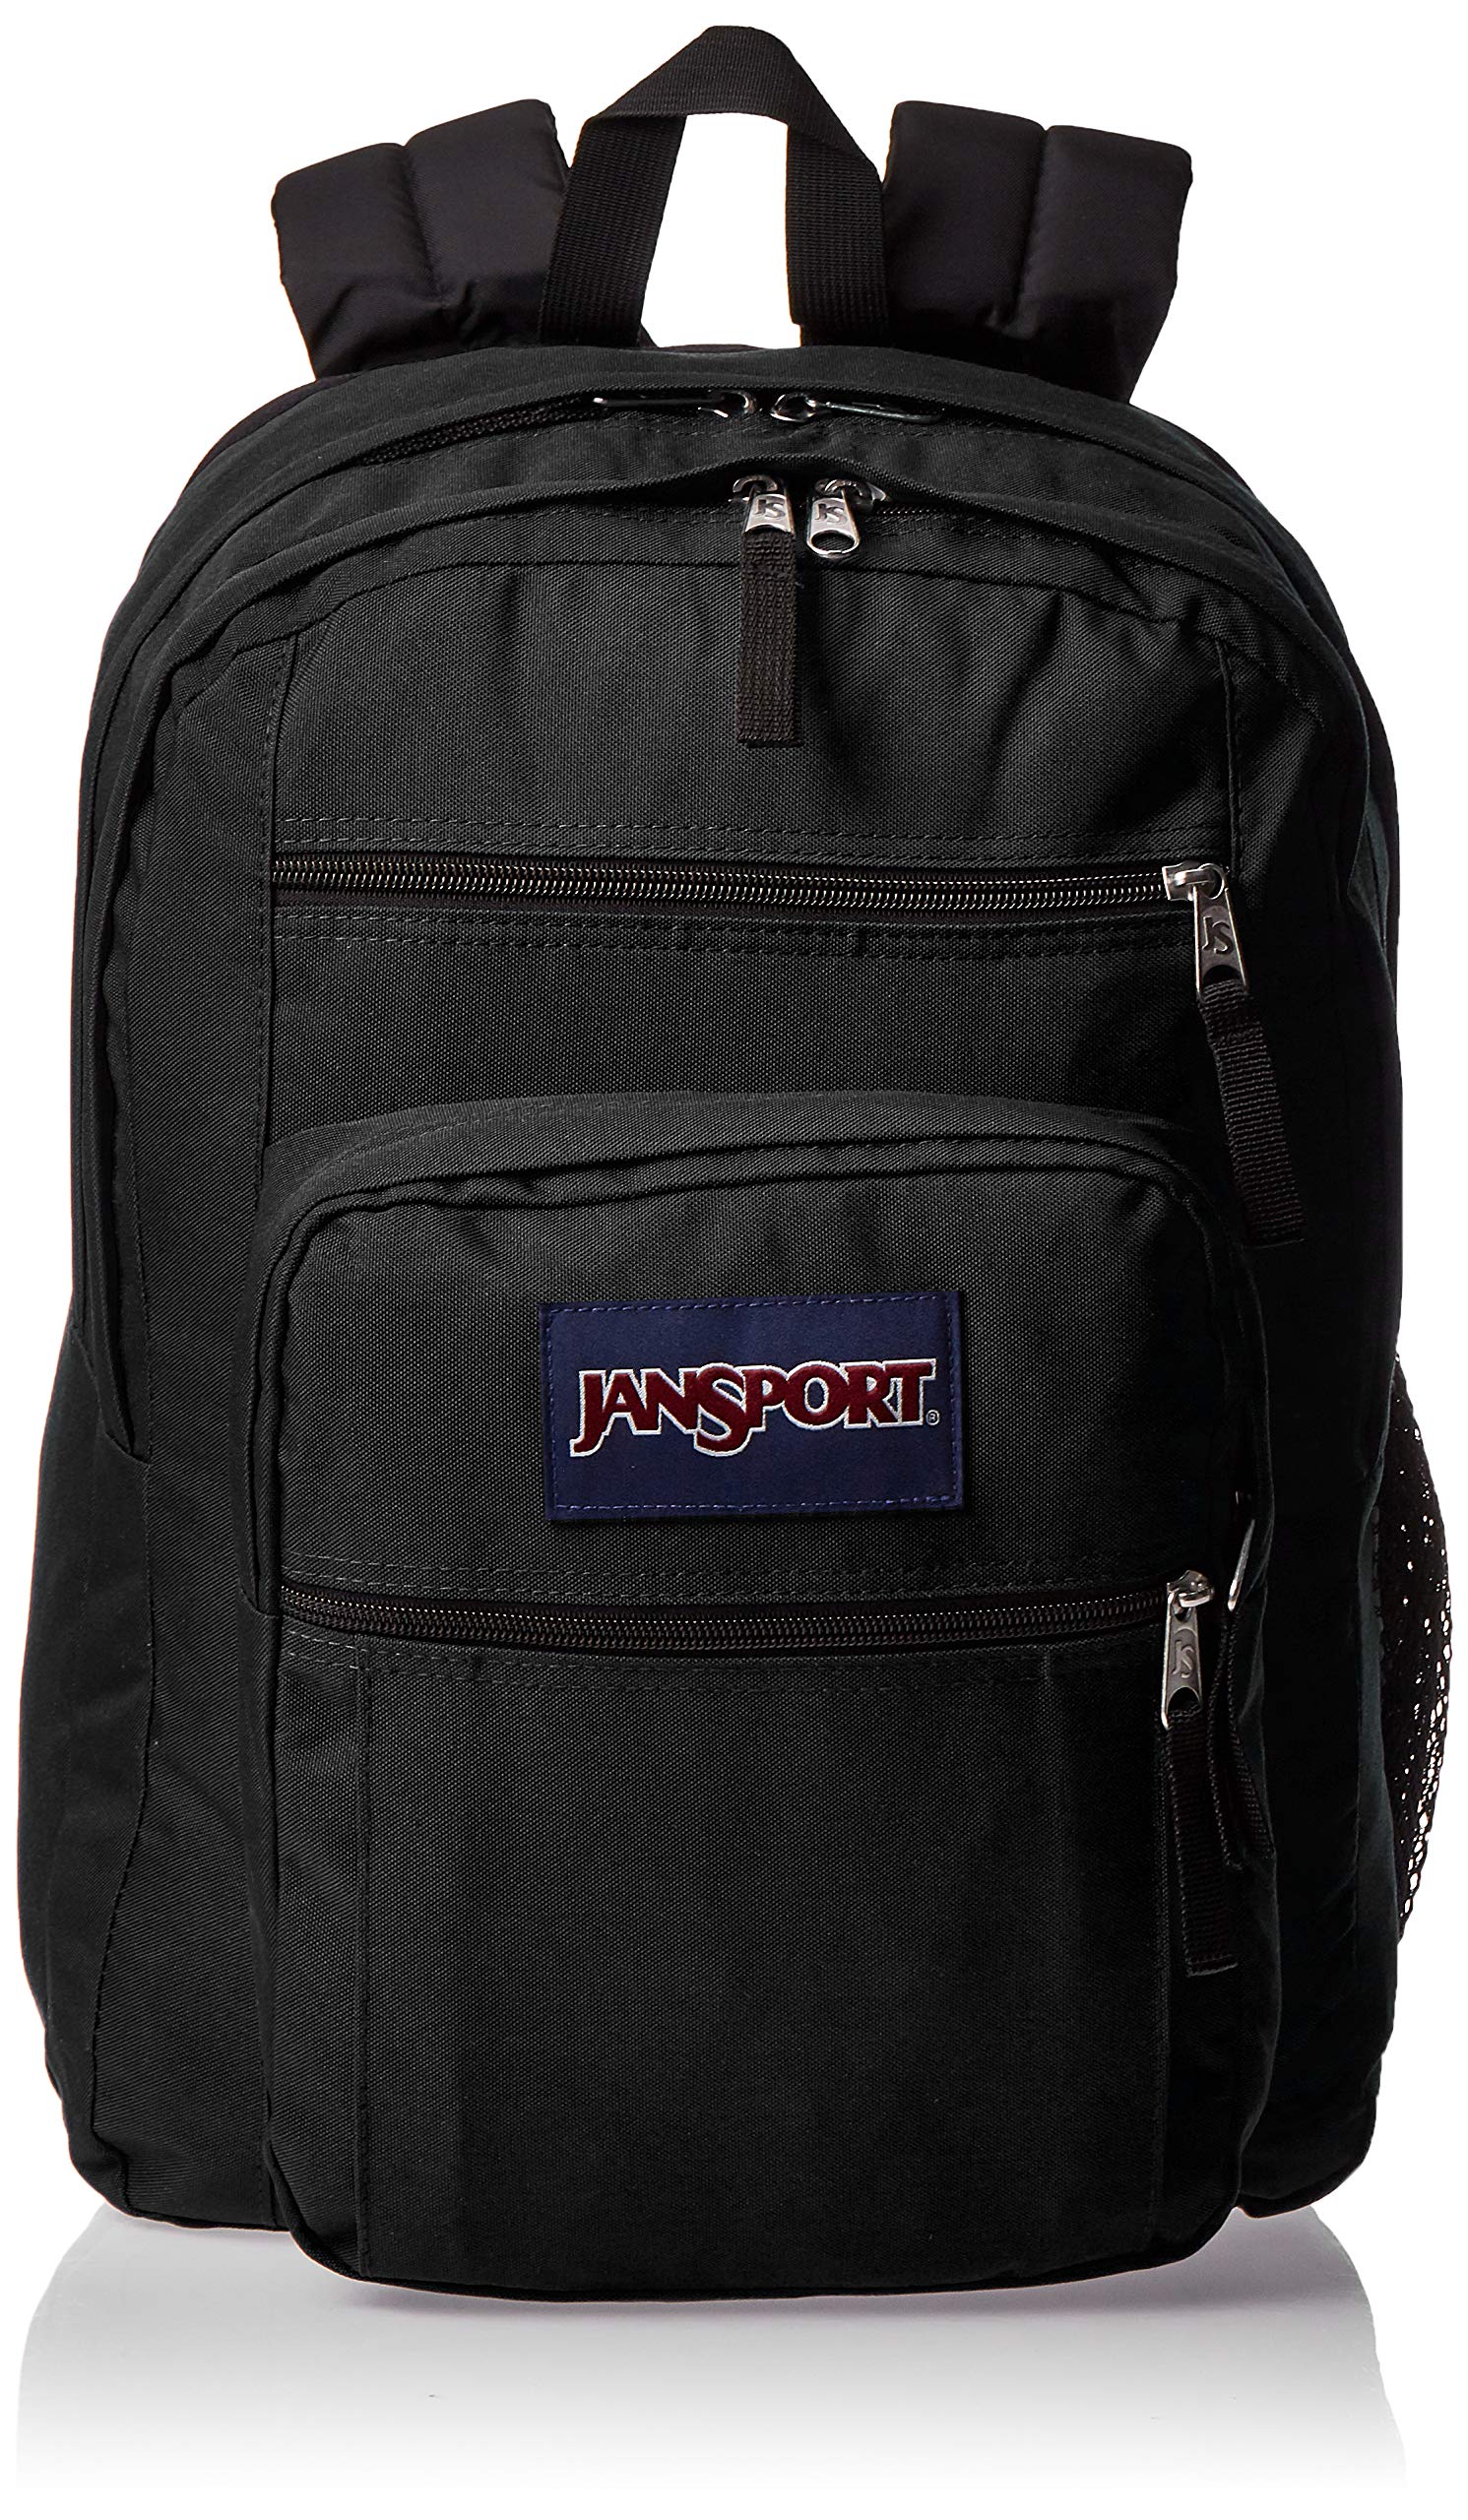 JanSport Big Student Backpack-School, Travel, or Work Bookbag -with 15-Inch  -Laptop Compartment, Black, One Size Black One Size